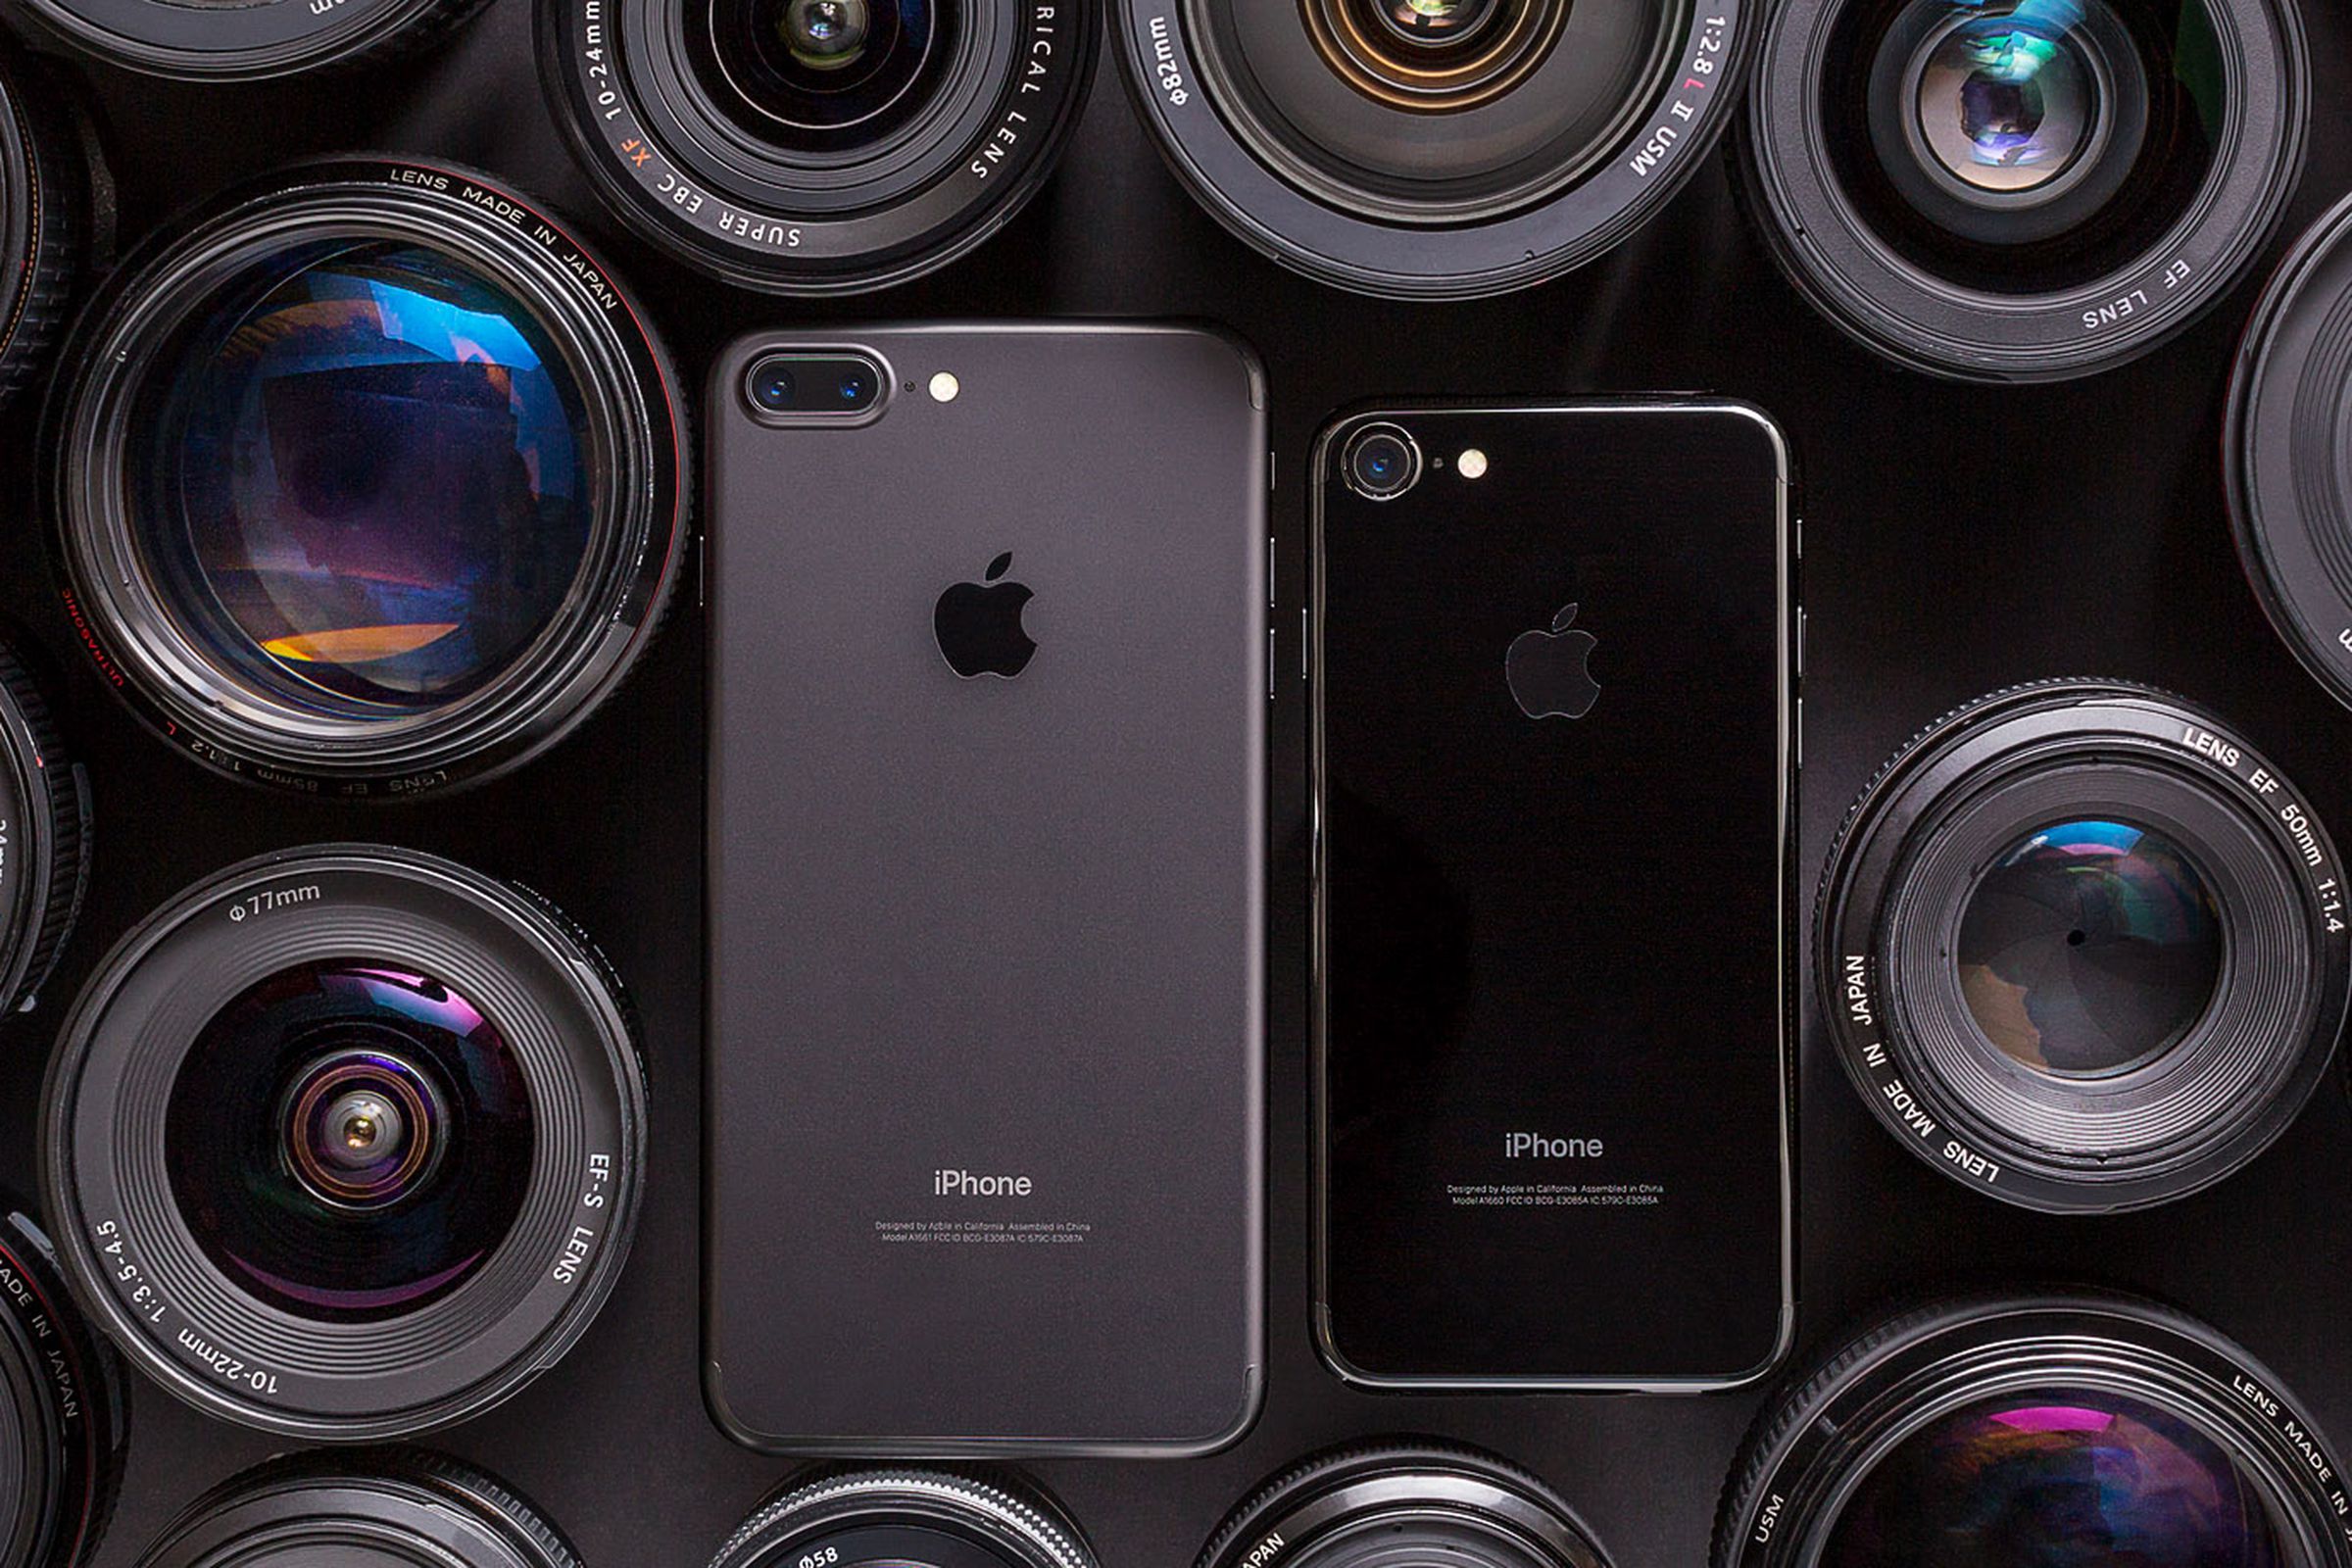 Apple iPhone 7 and iPhone 7 Plus camera with lenses